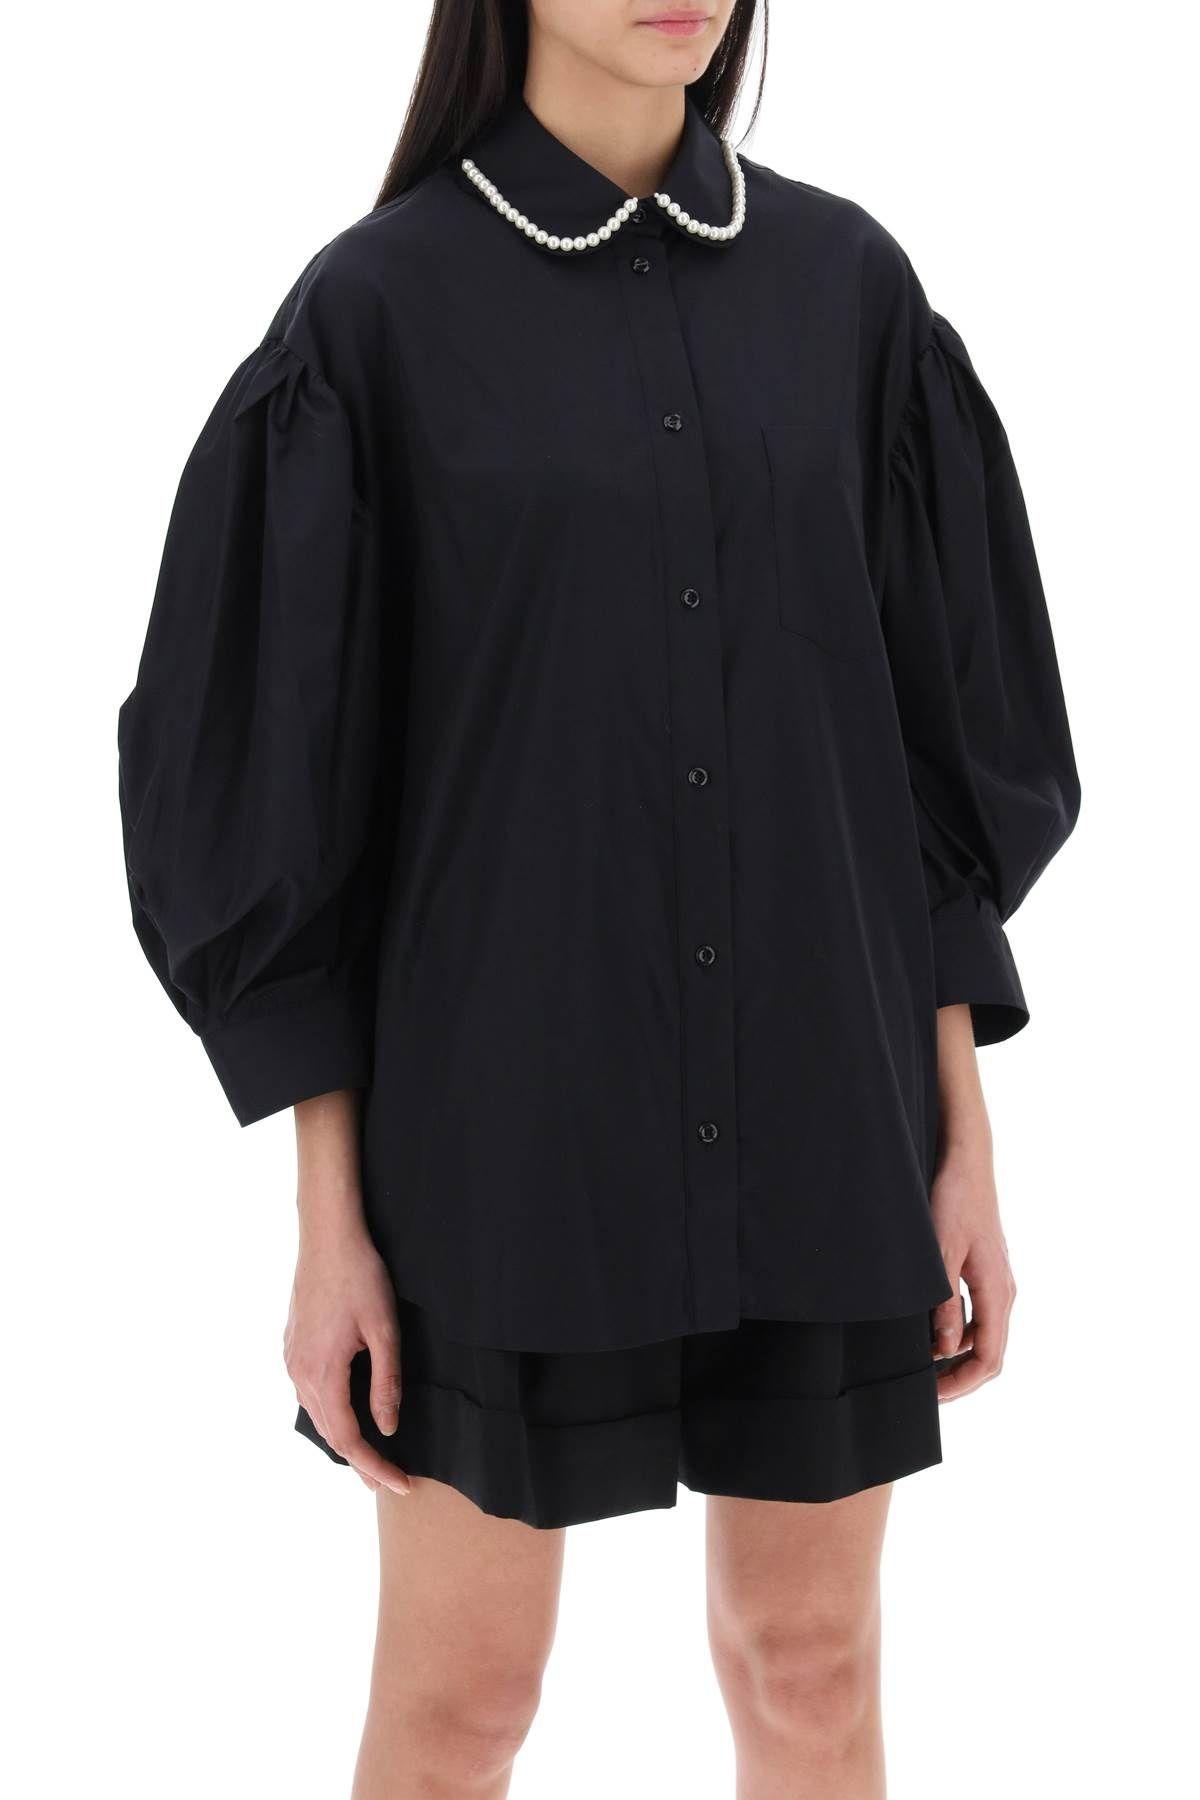 "Oversized blouse with puffed sleeves" Simone Rocha - 3